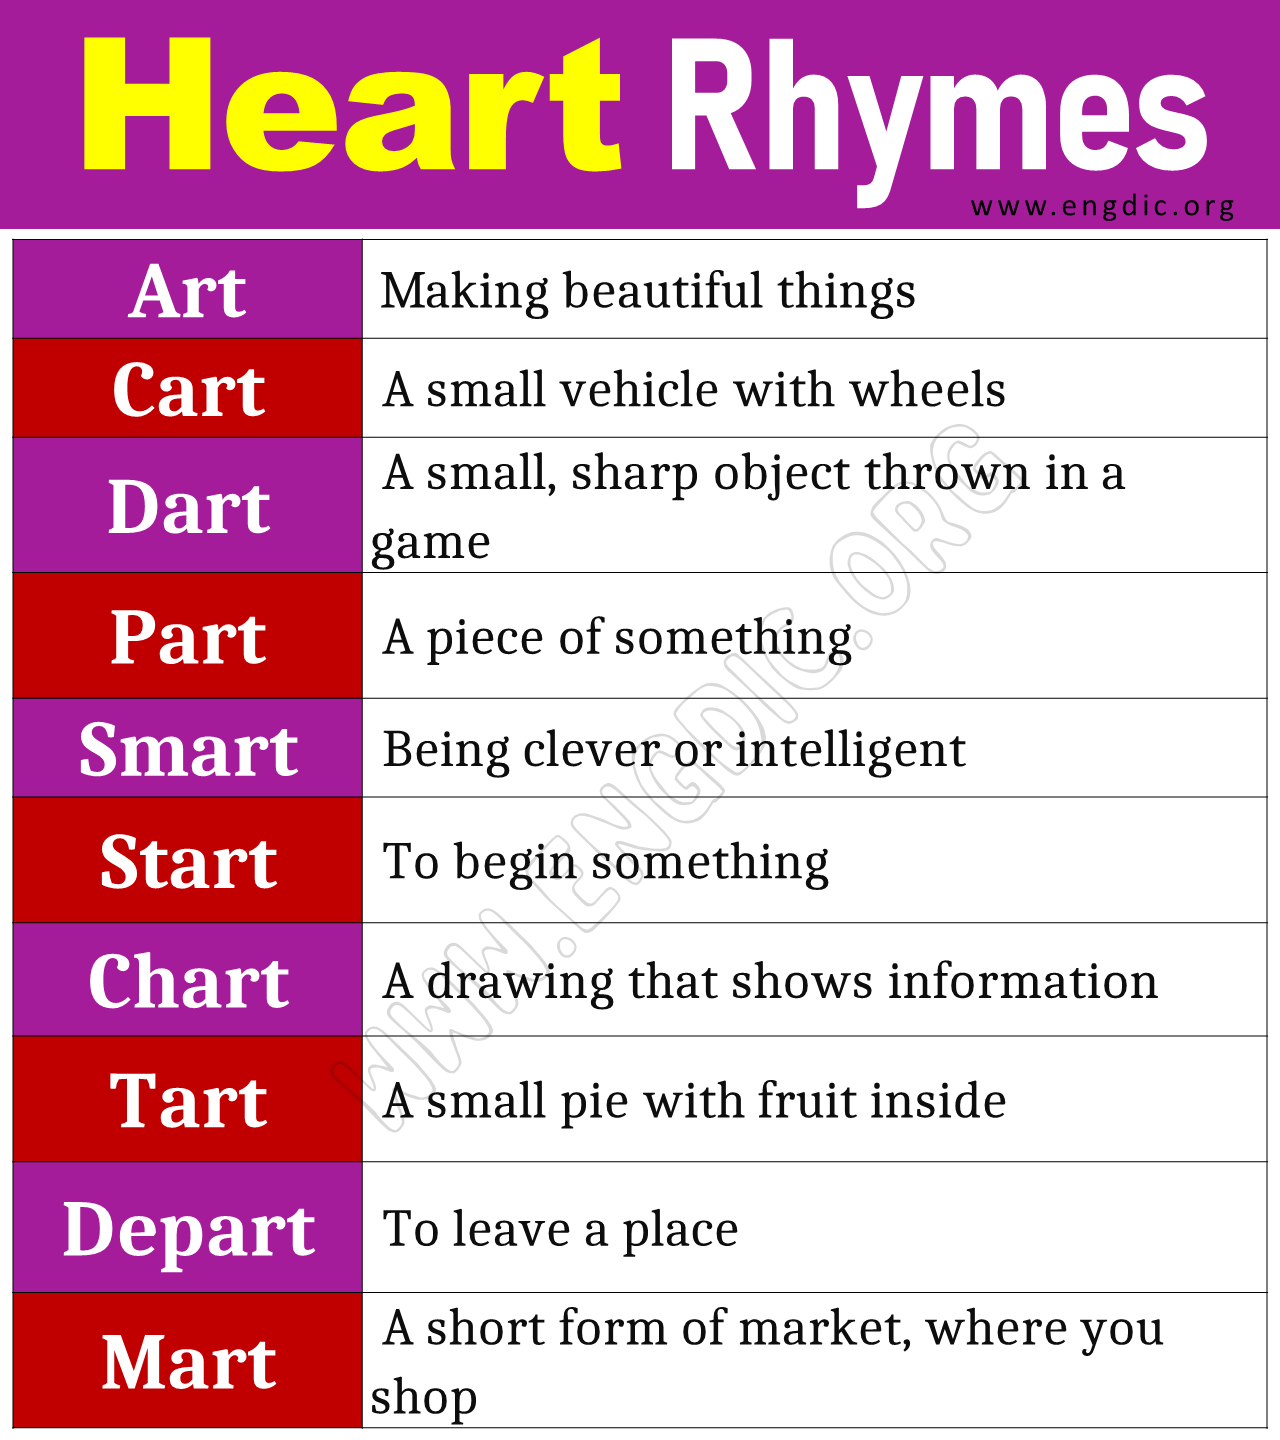 Words that Rhyme with Heart